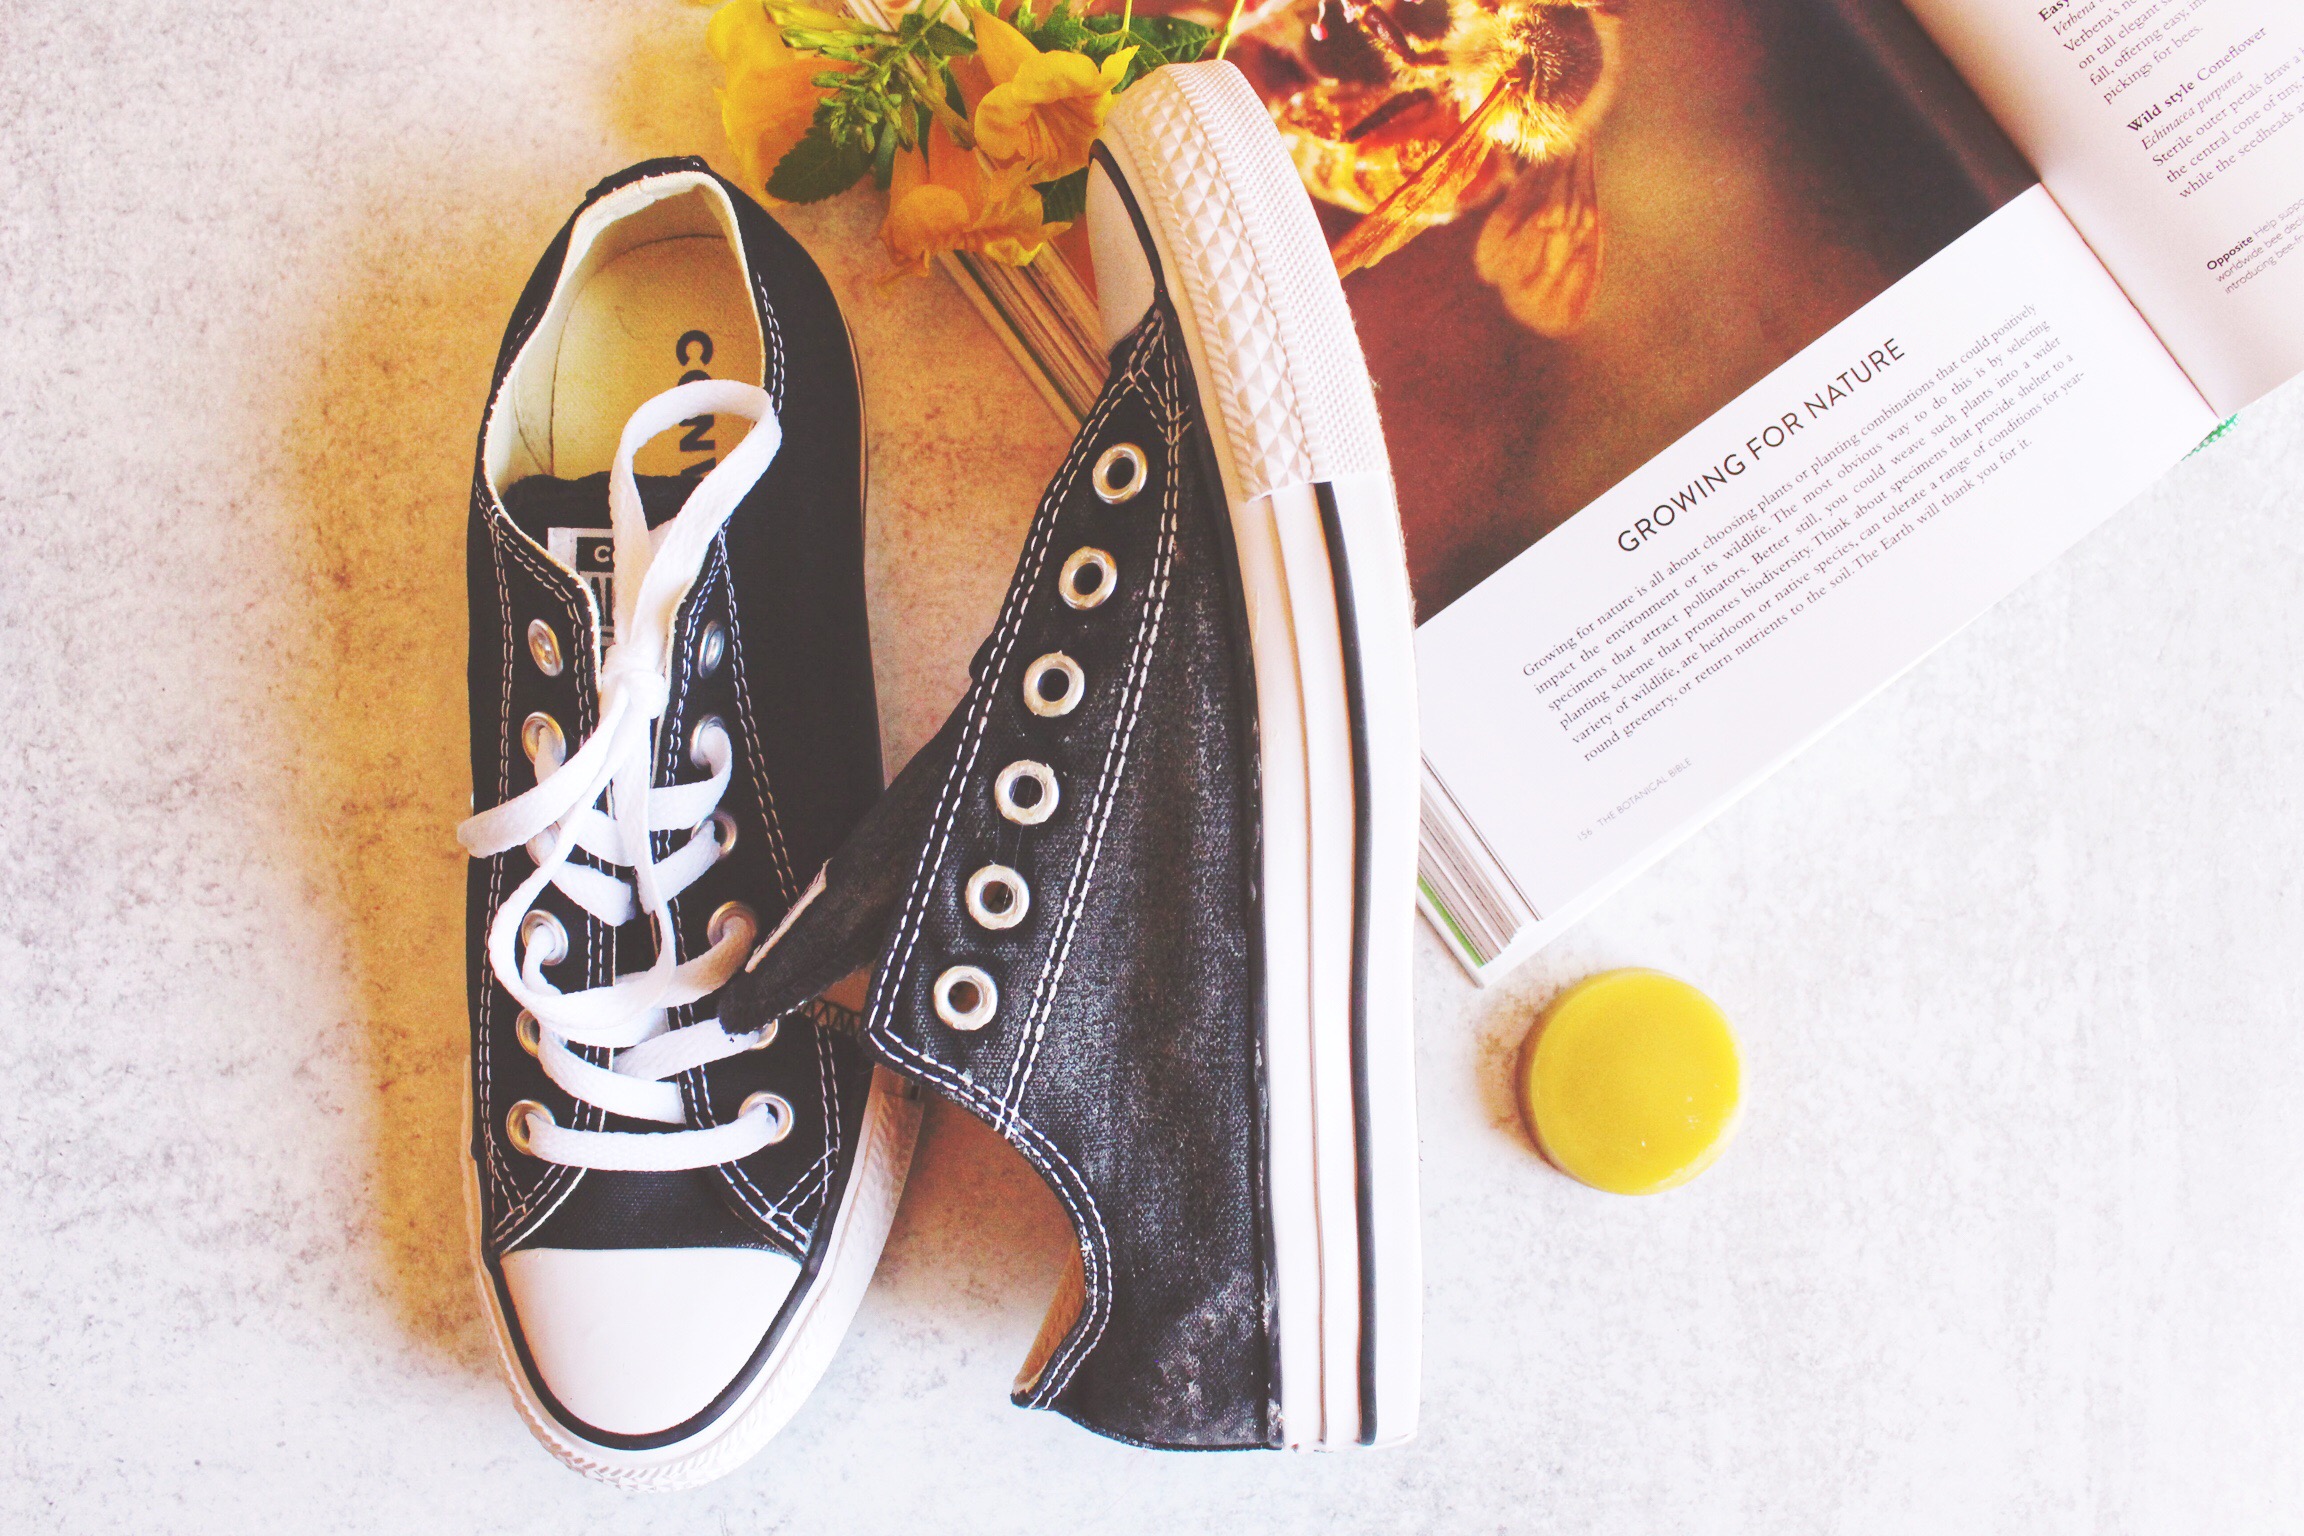 How to waterproof converse naturally Archives - Christie Moeller